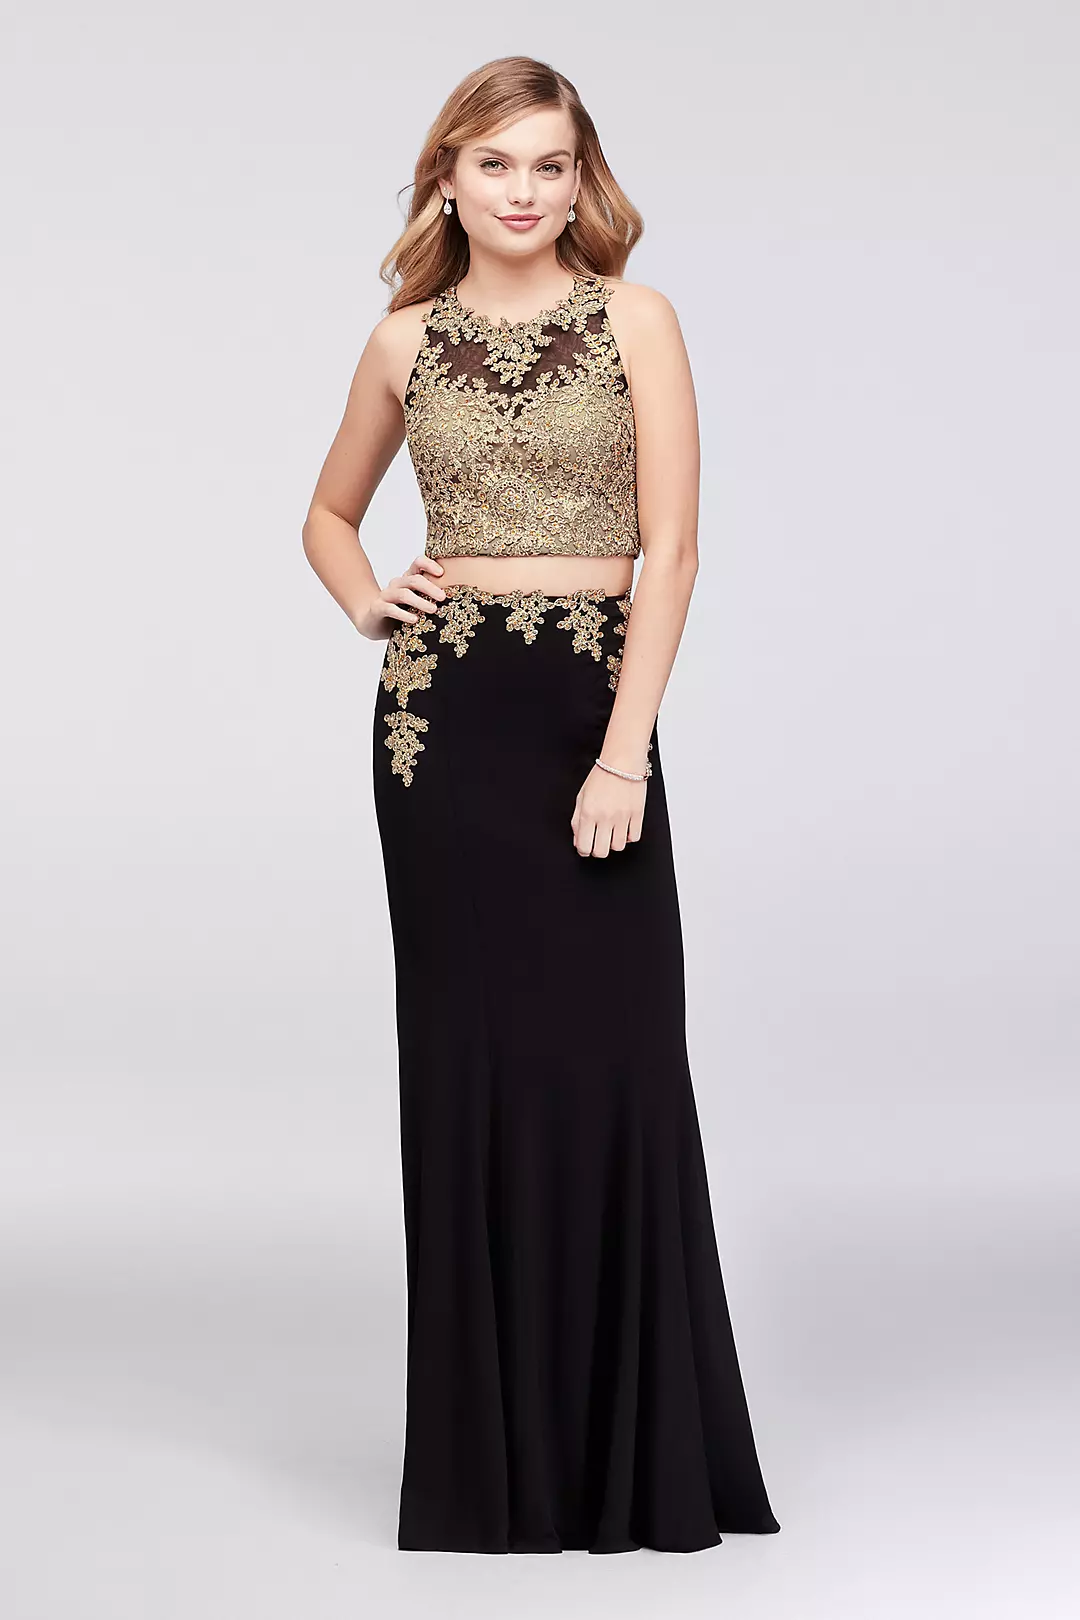 Corded Lace Applique Jersey Two-Piece Dress Image